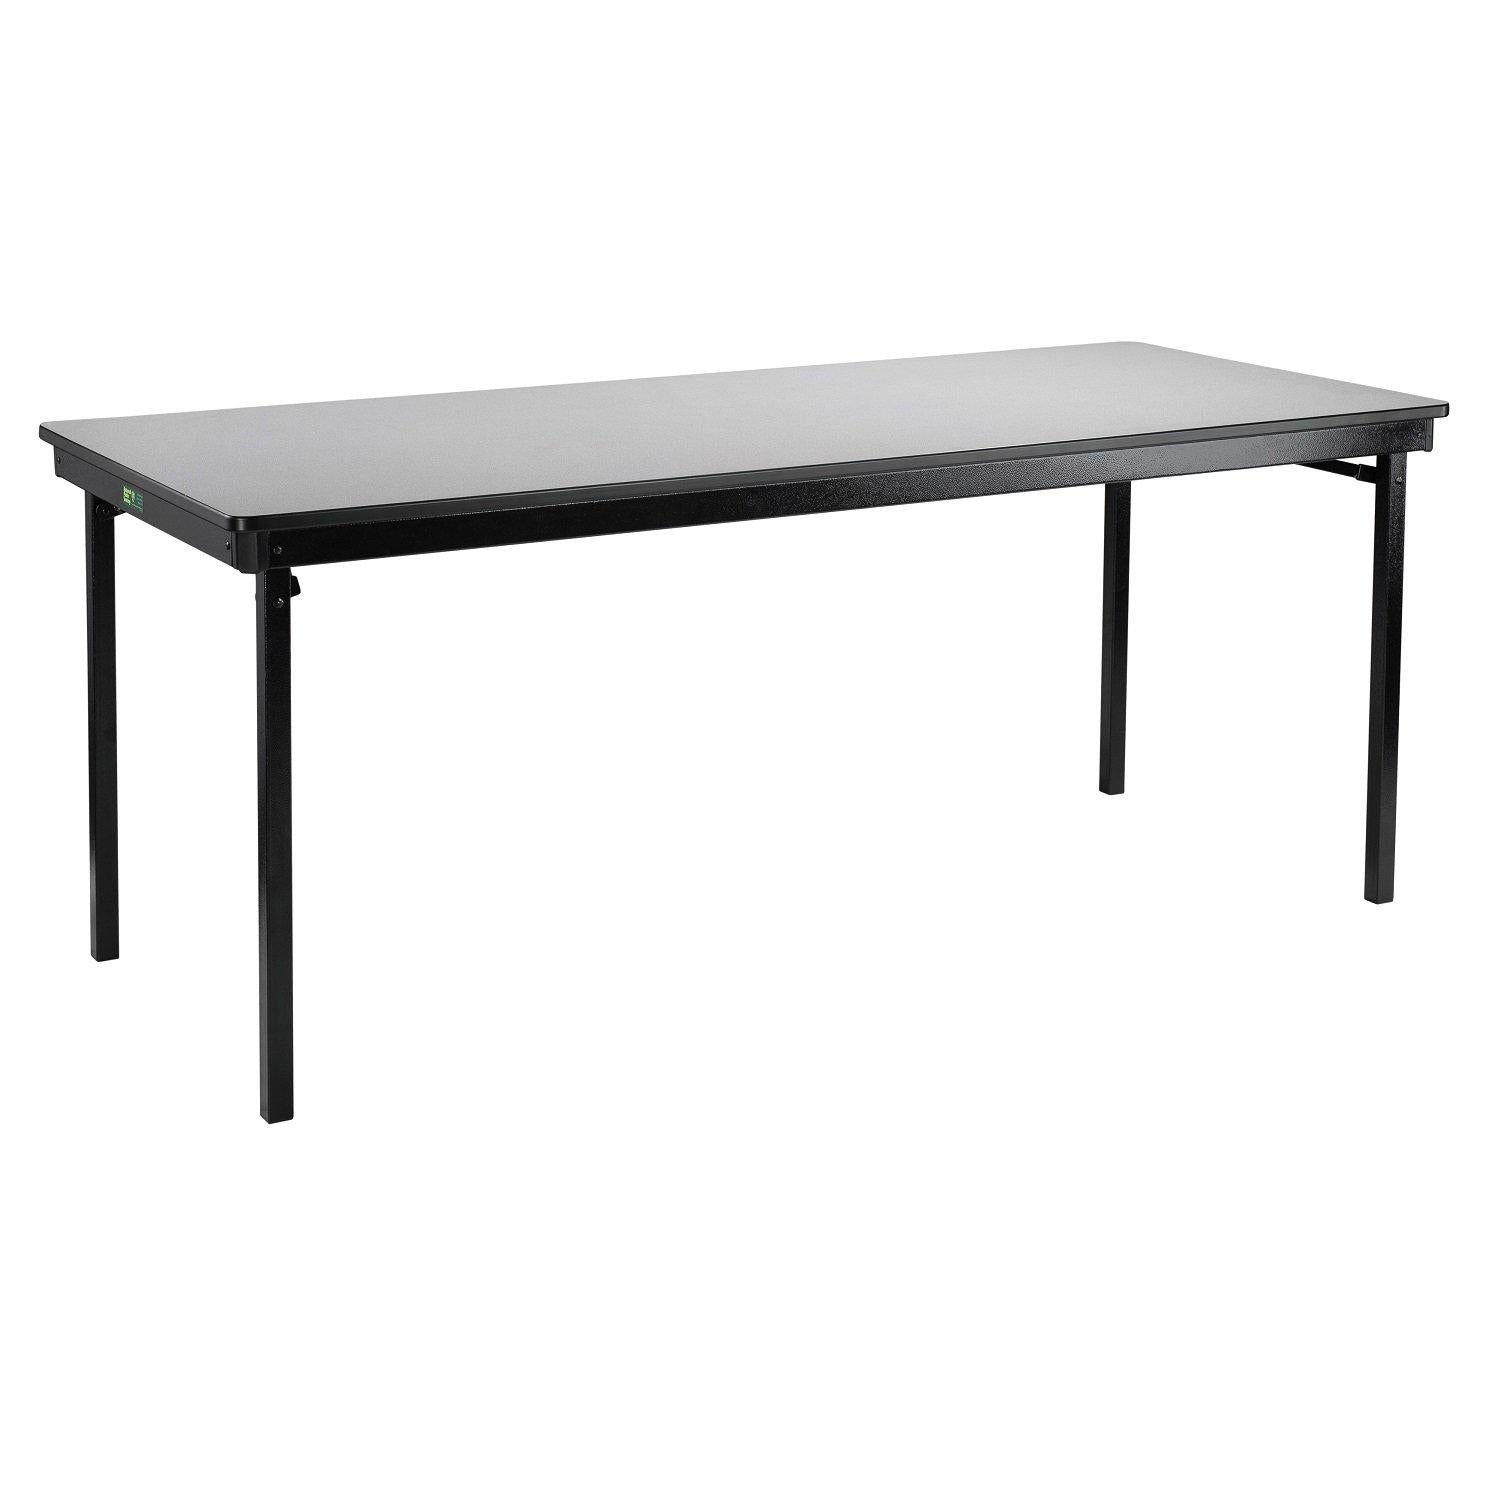 Max Seating Folding Table, 24" x 48", Premium Plywood Core, High Pressure Laminate Top with T-Mold Edging